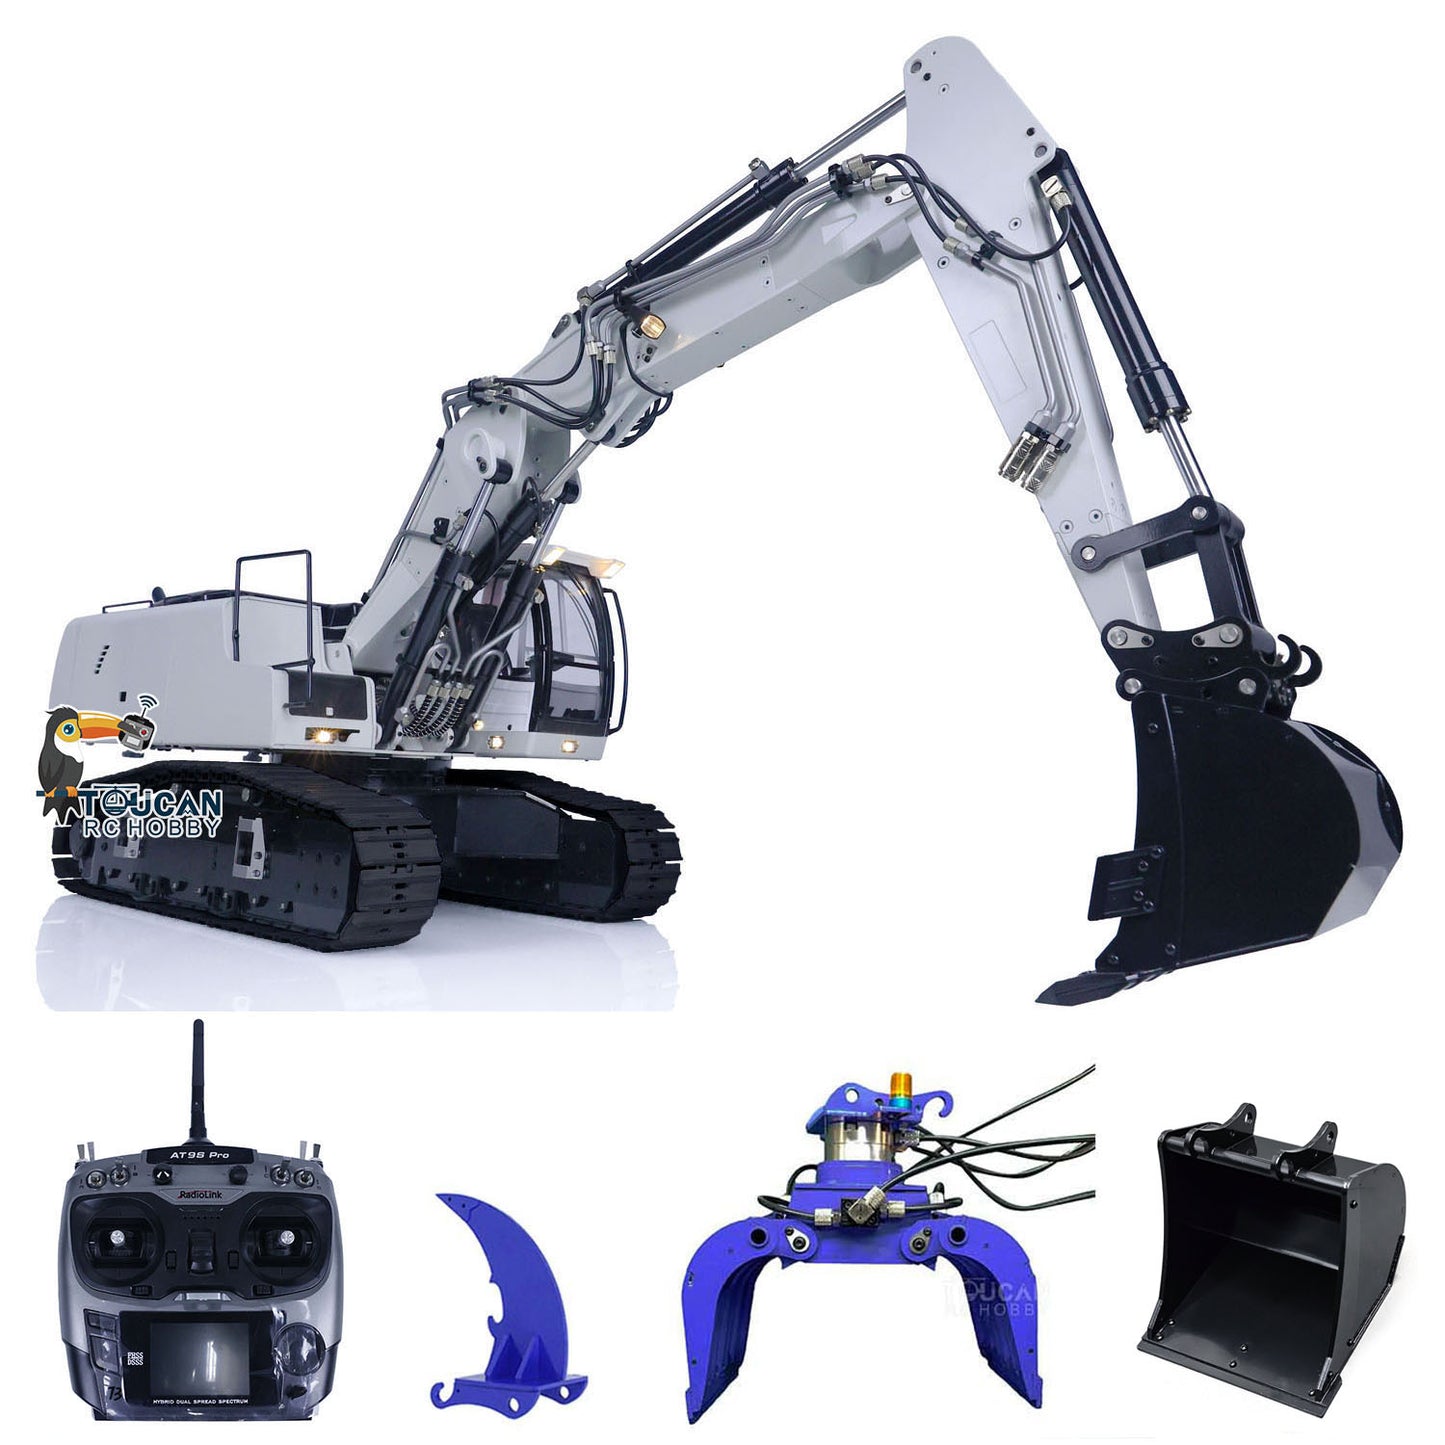 IN STOCK MTM 1/14 946-3 10CH RC Tracked Hydraulic Excavator 3 Arms Metal Diggers Assembled Painted Model Ripper Grab Bucket Toy ESC